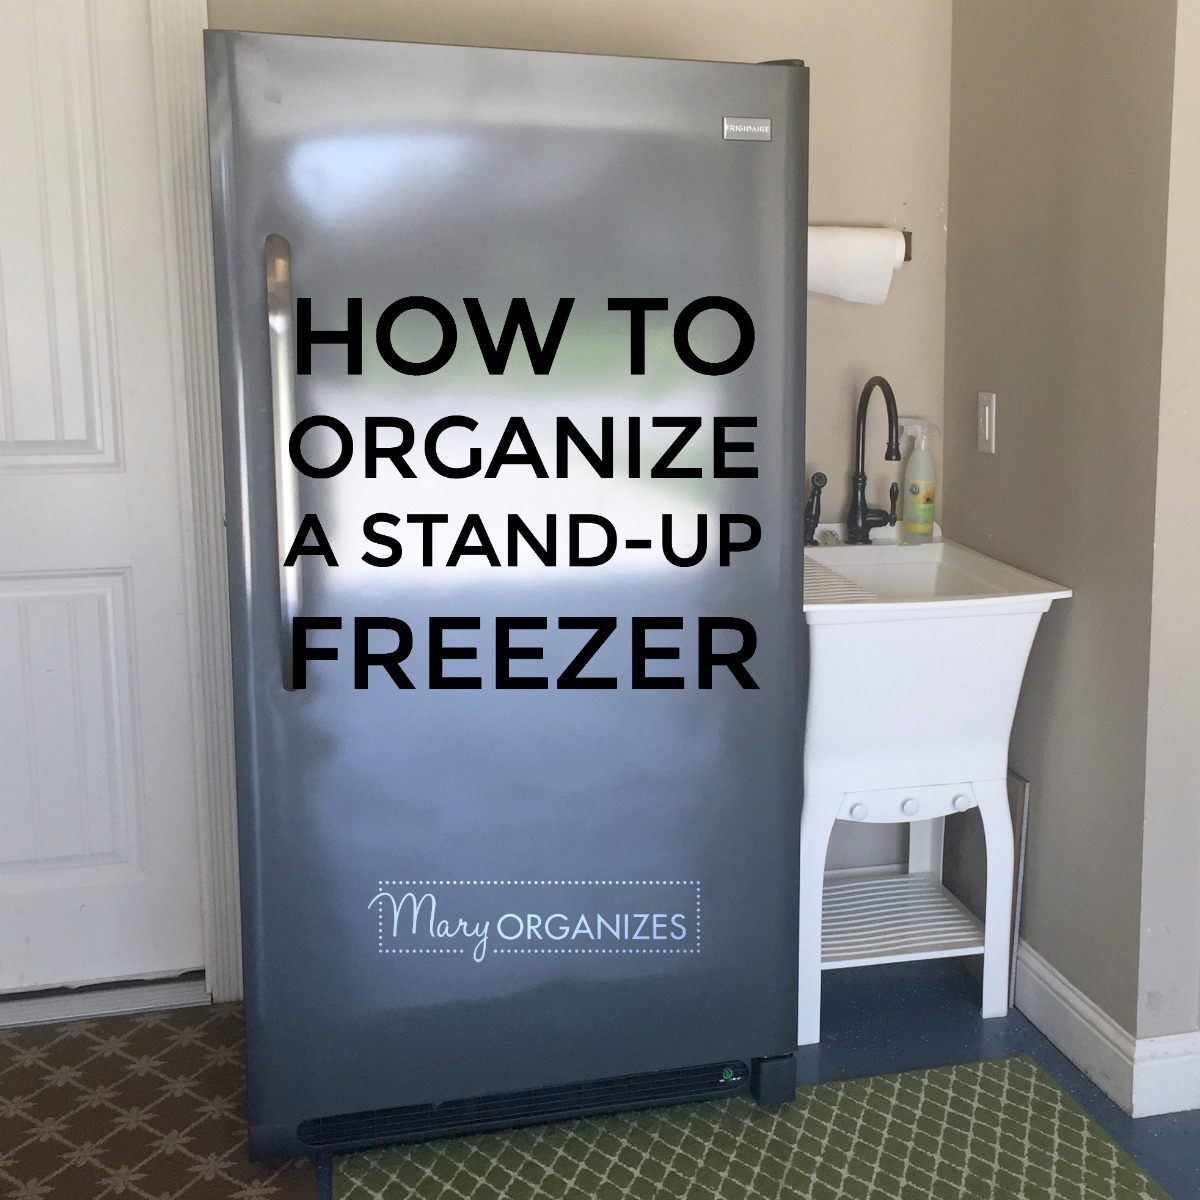 Ideas for Organizing a Chest Freezer- Kitchen Organization  Freezer  organization, Chest freezer organization, Chest freezer storage